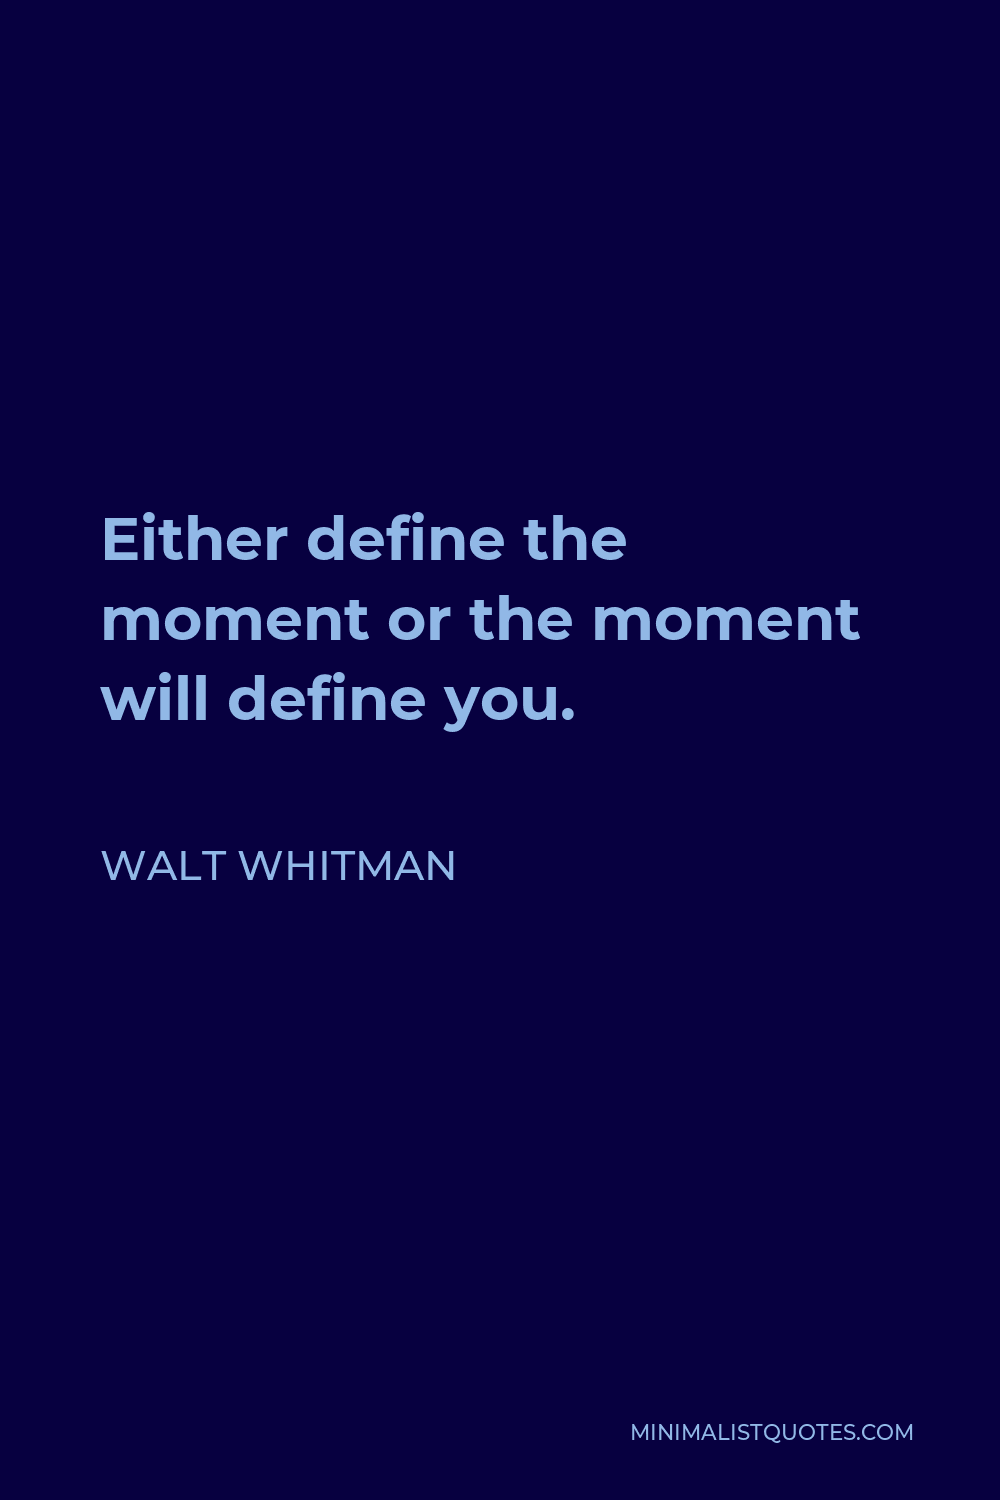 Walt Whitman Quote - Either define the moment or the moment will define you.